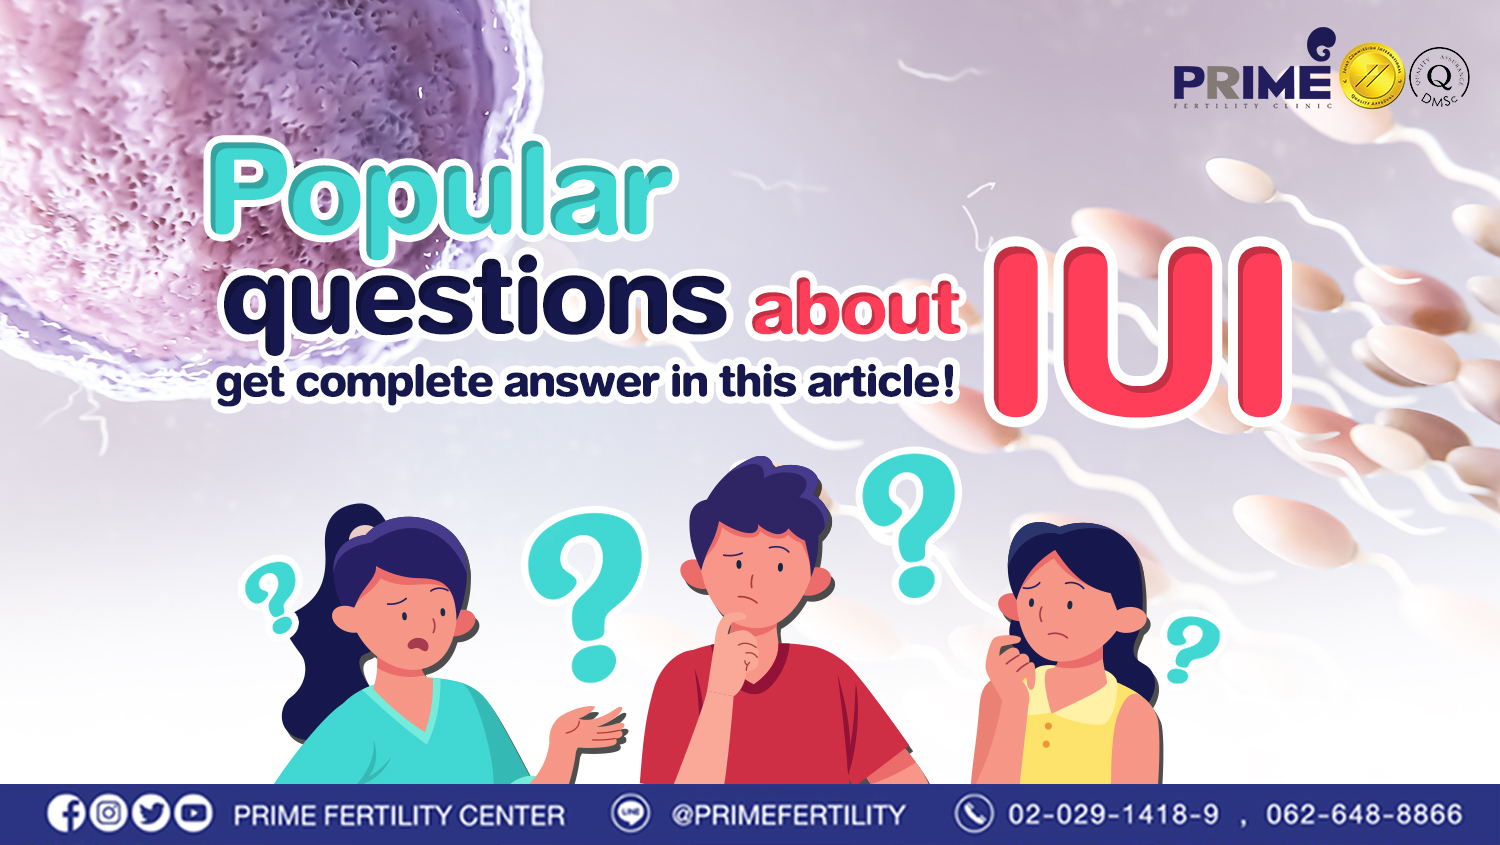 Popular questions about IUI, get complete answer in this article!